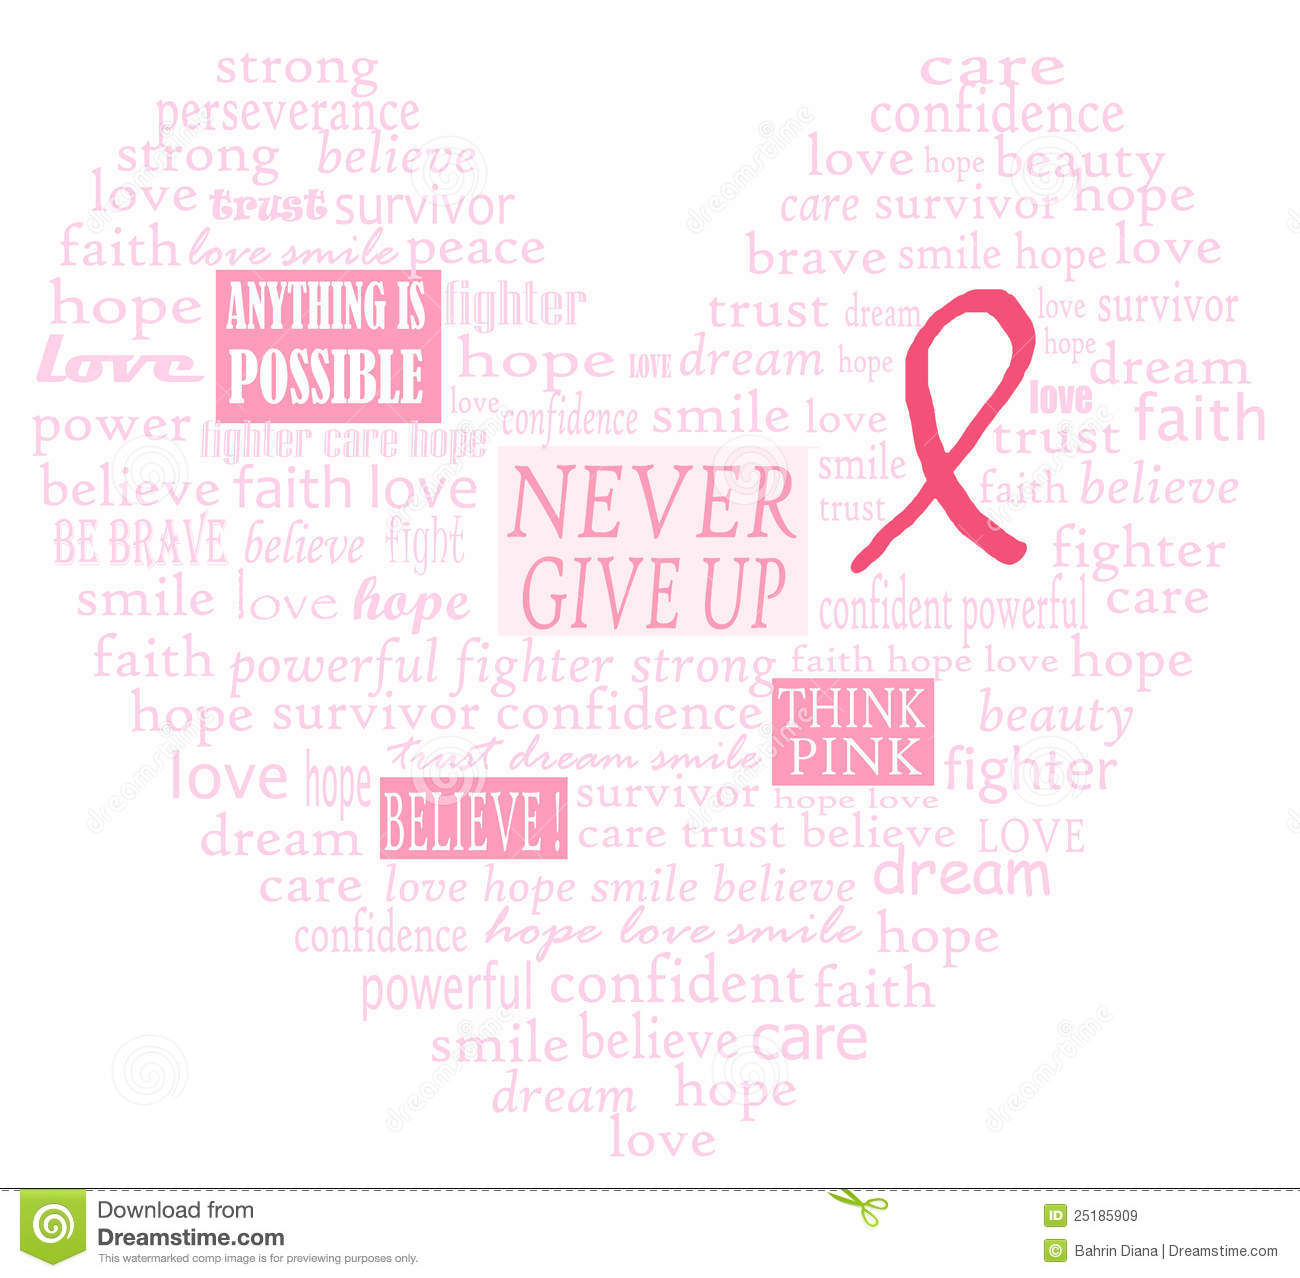 Cancer Support Friend Quotes. QuotesGram